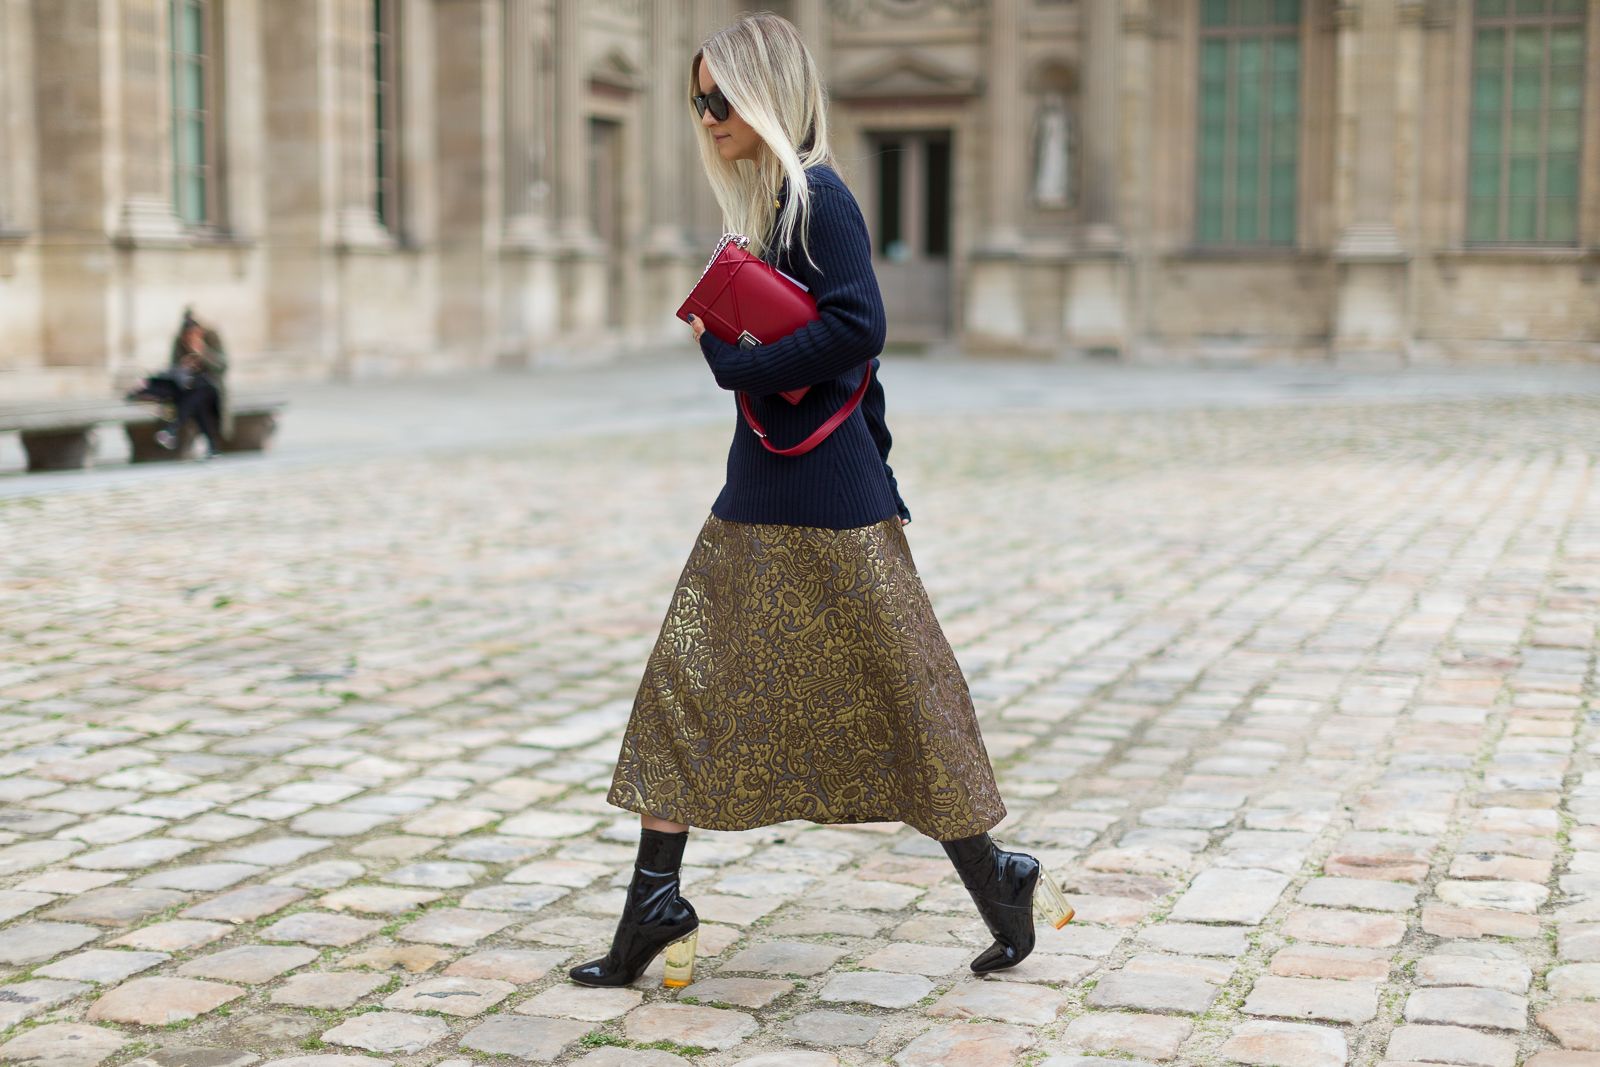 Fall Work Outfit Ideas Inspired by Street Style